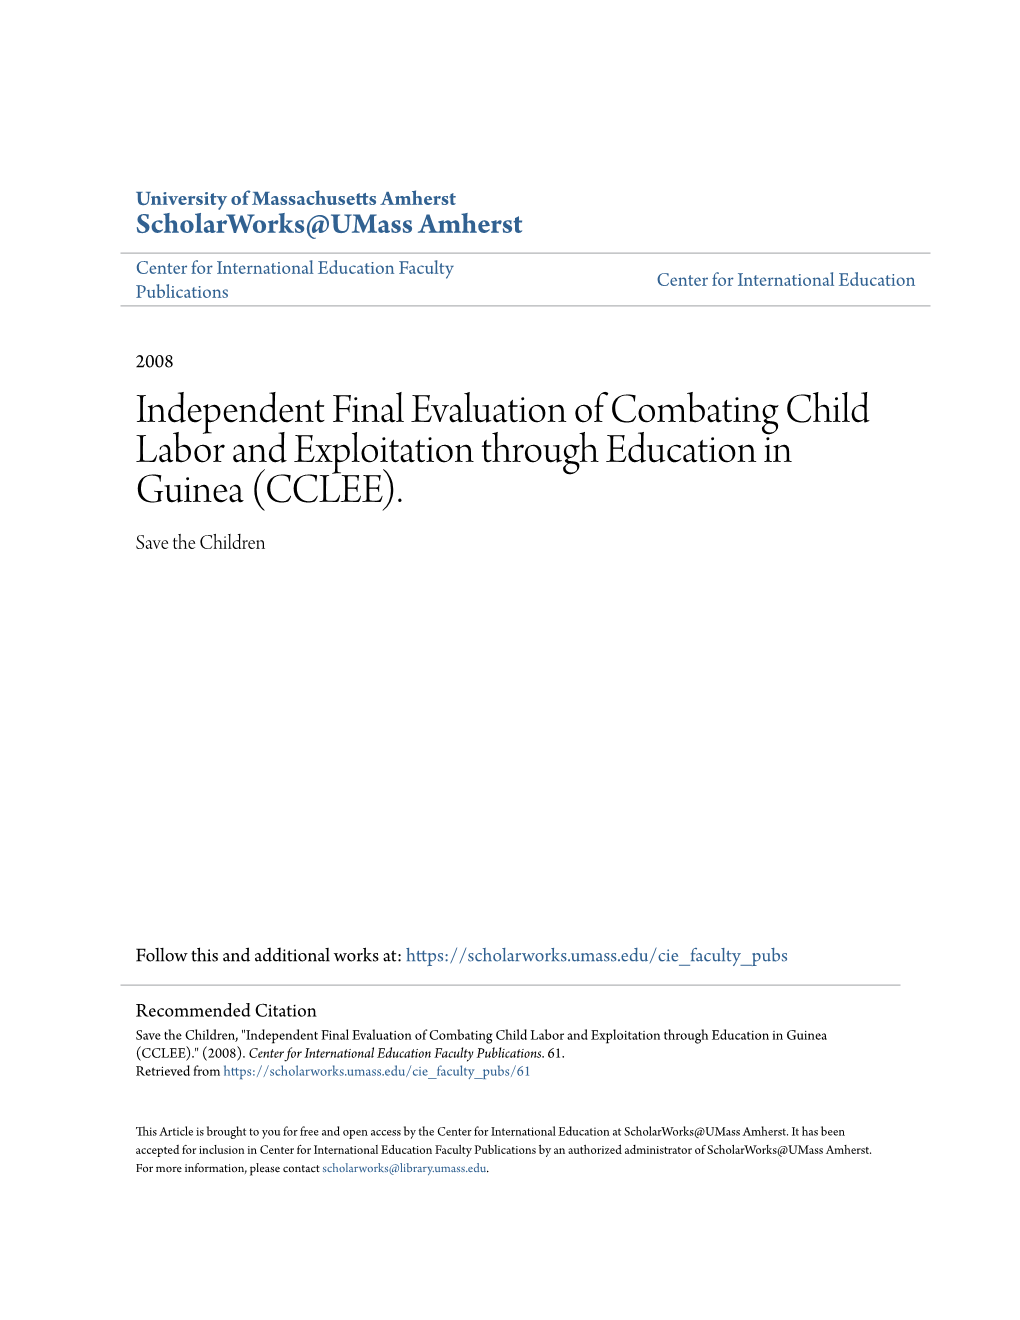 Independent Final Evaluation of Combating Child Labor and Exploitation Through Education in Guinea (CCLEE)